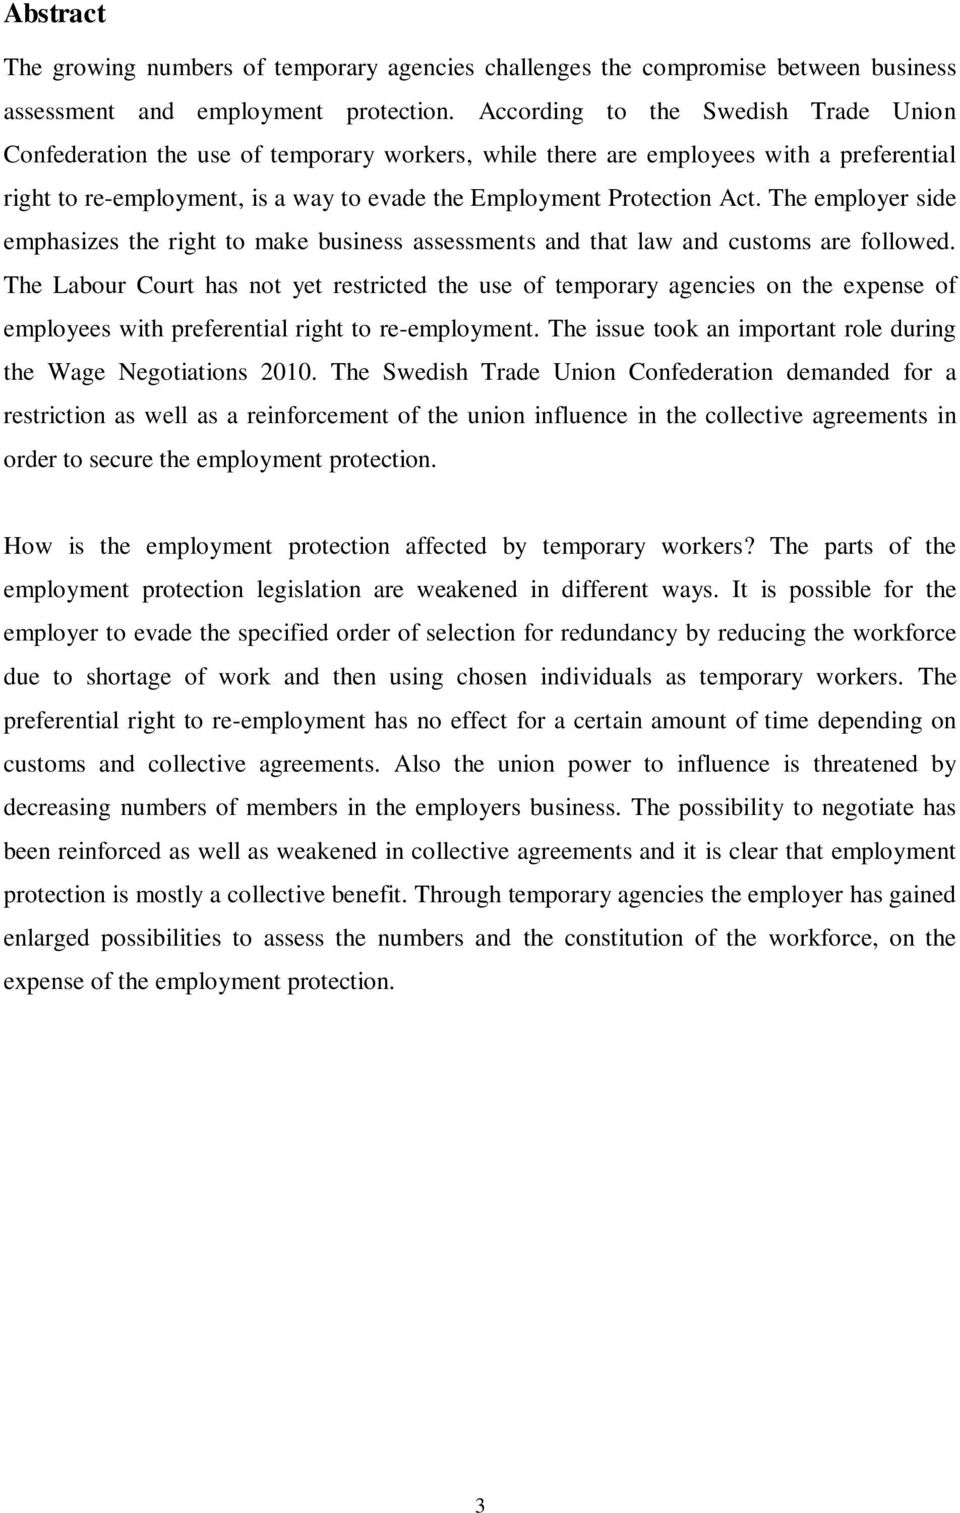 The employer side emphasizes the right to make business assessments and that law and customs are followed.